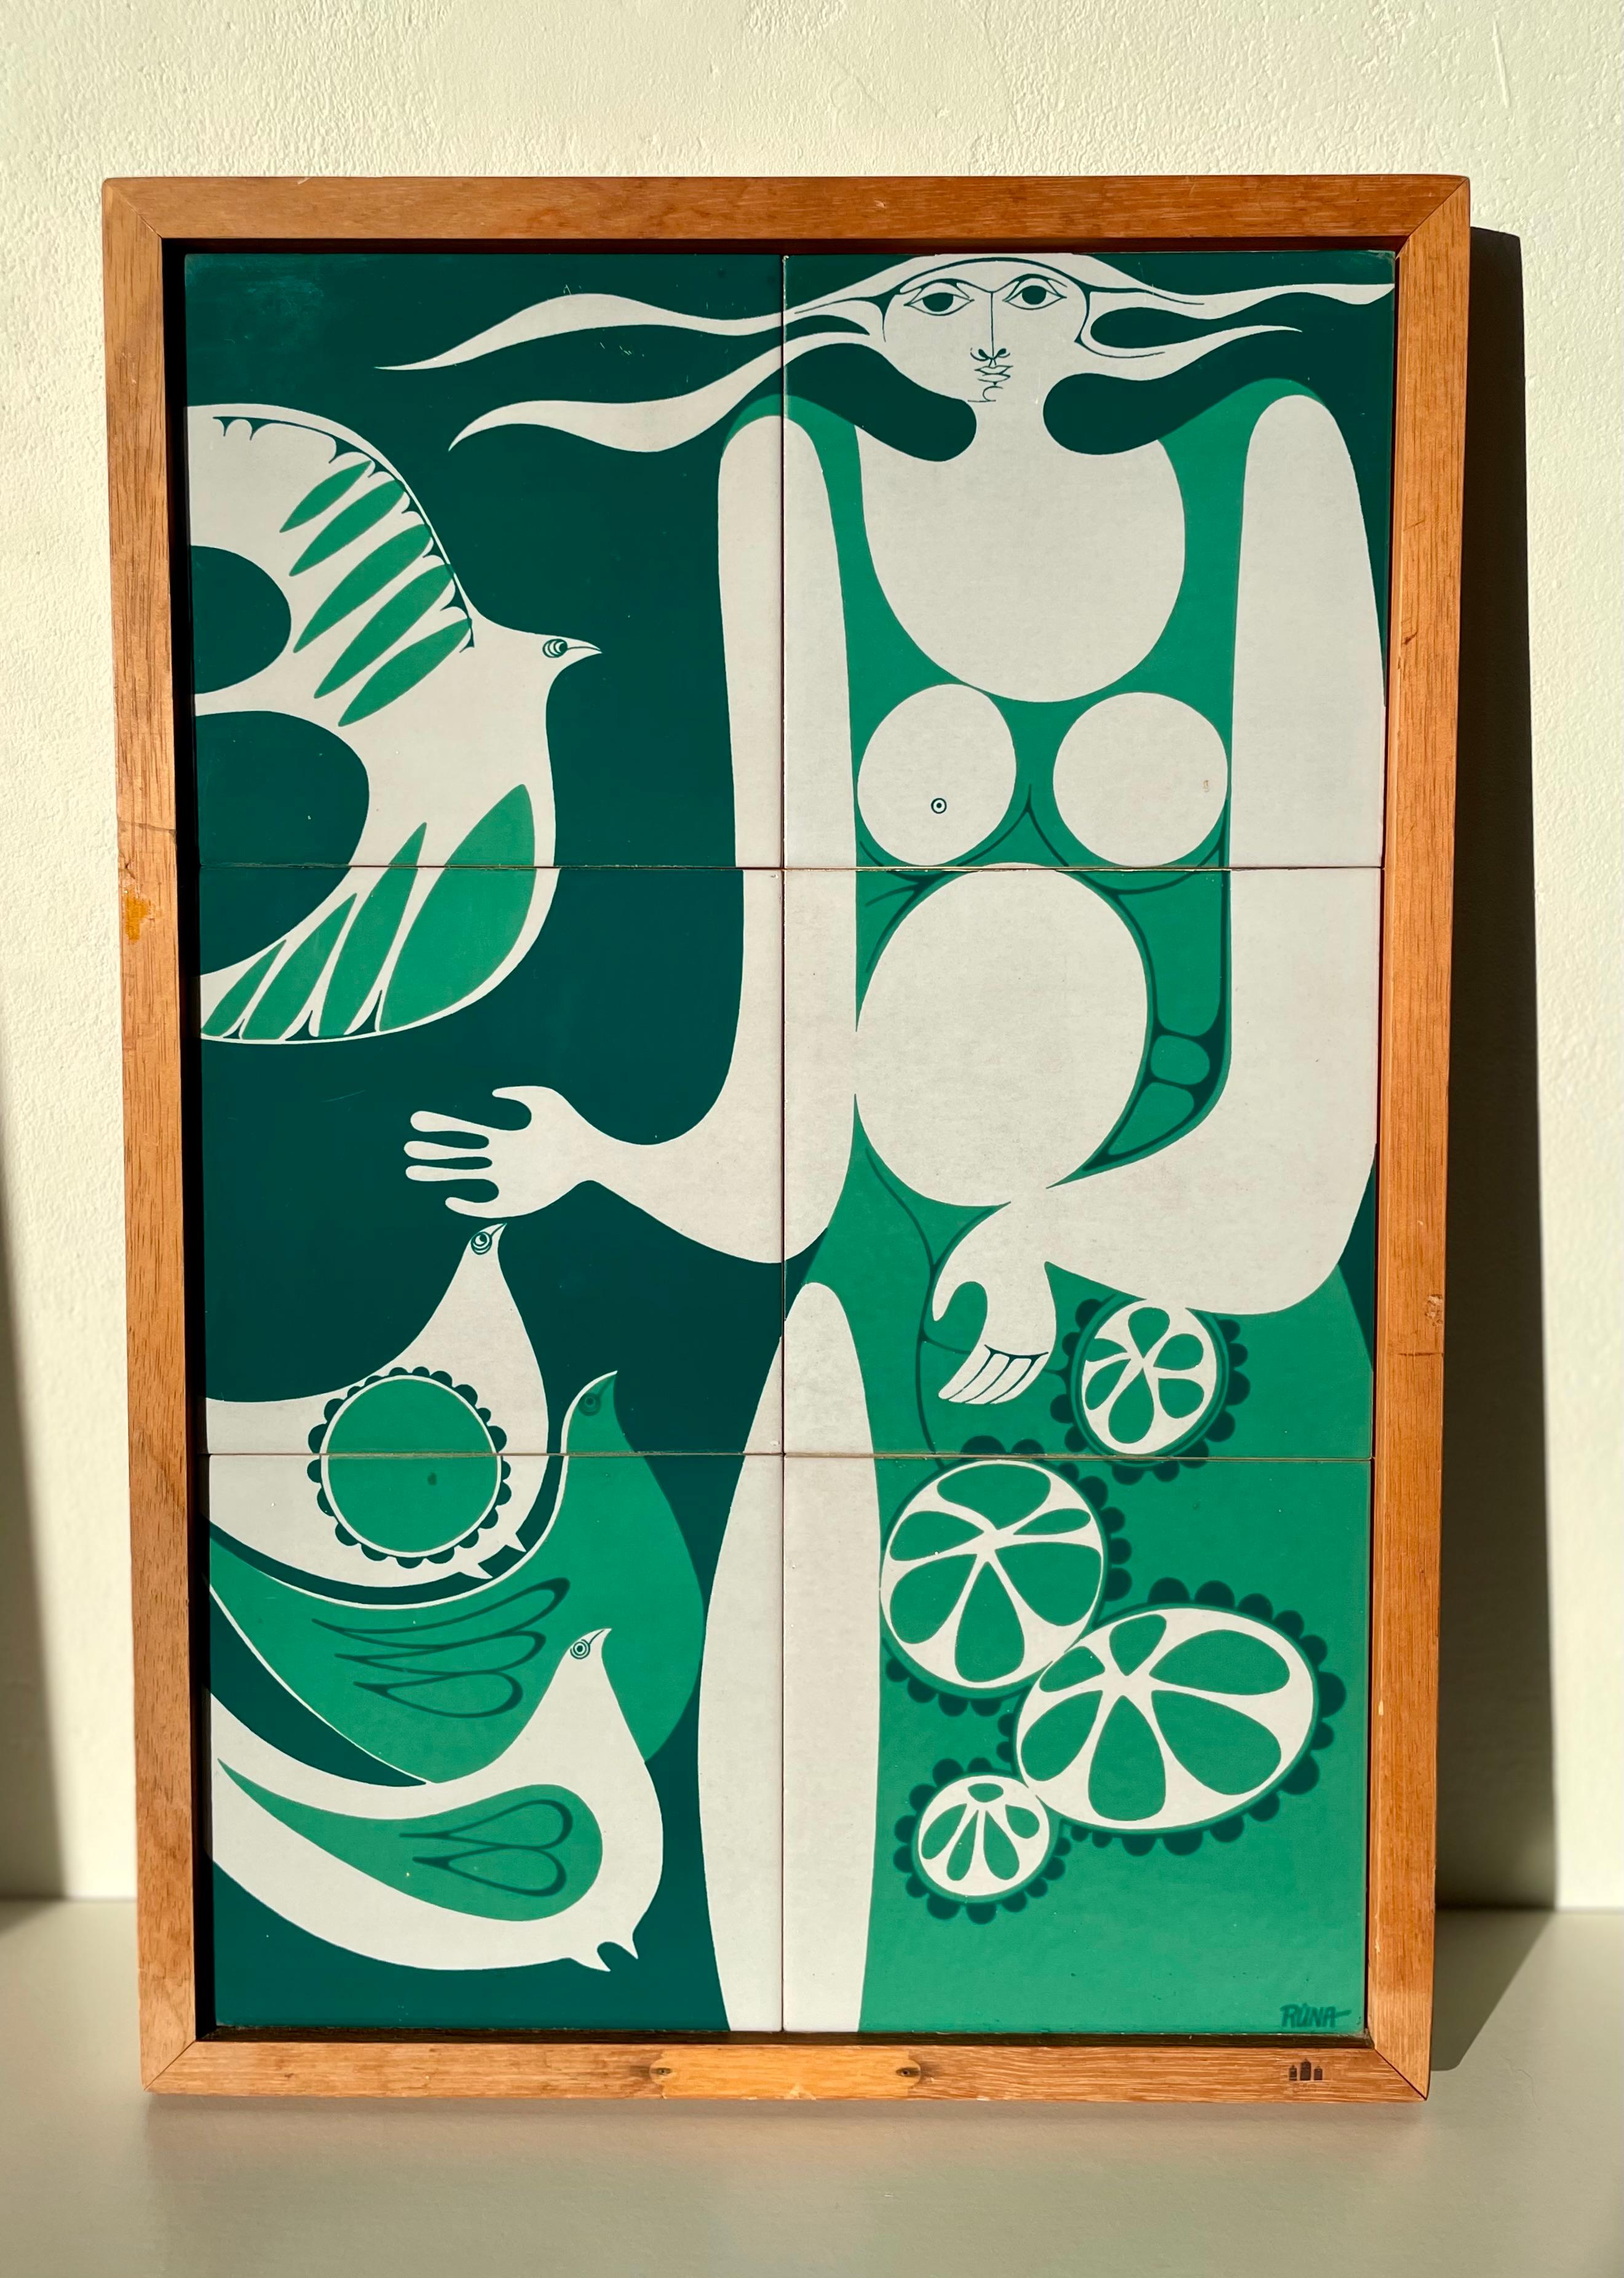 Exceptional Danish Mid-Century Modern piece of ceramic artistry. Handmade wall plaque made of six glazed tiles (each 15x15 cm) in white, dark pine and forest green colors, all handpainted with soft, organic, geometric shapes to depict four birds and